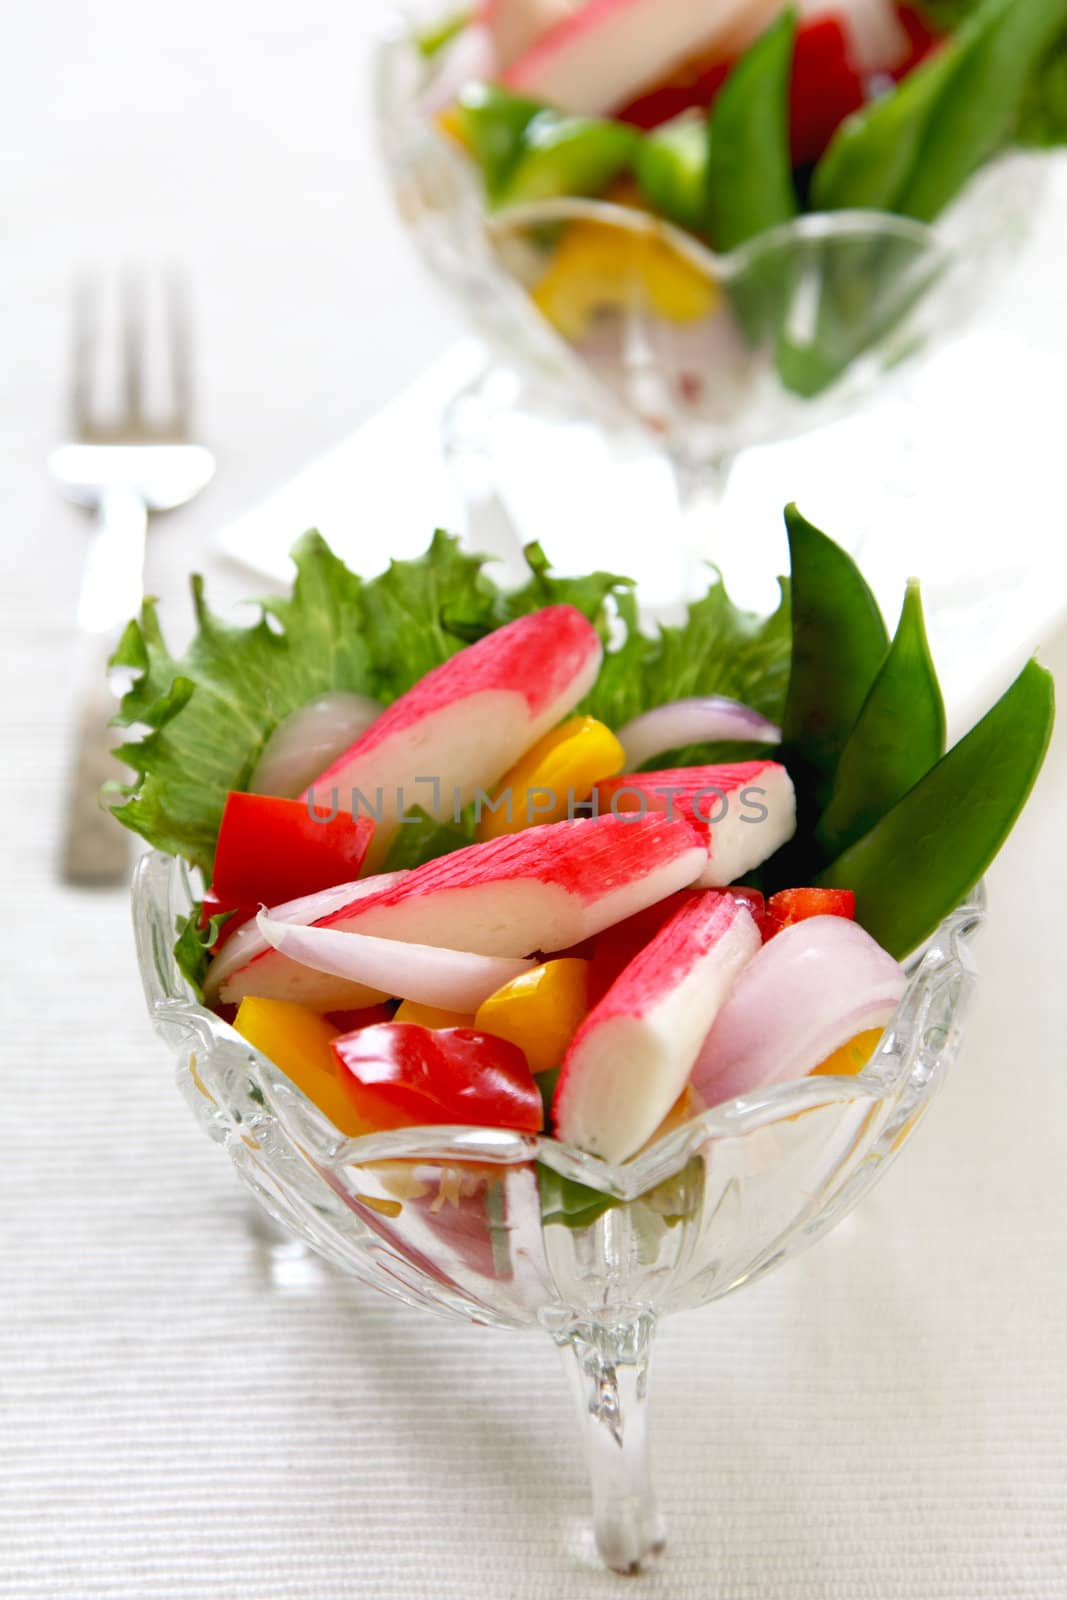 Crab stick with pepper and lettuce salad